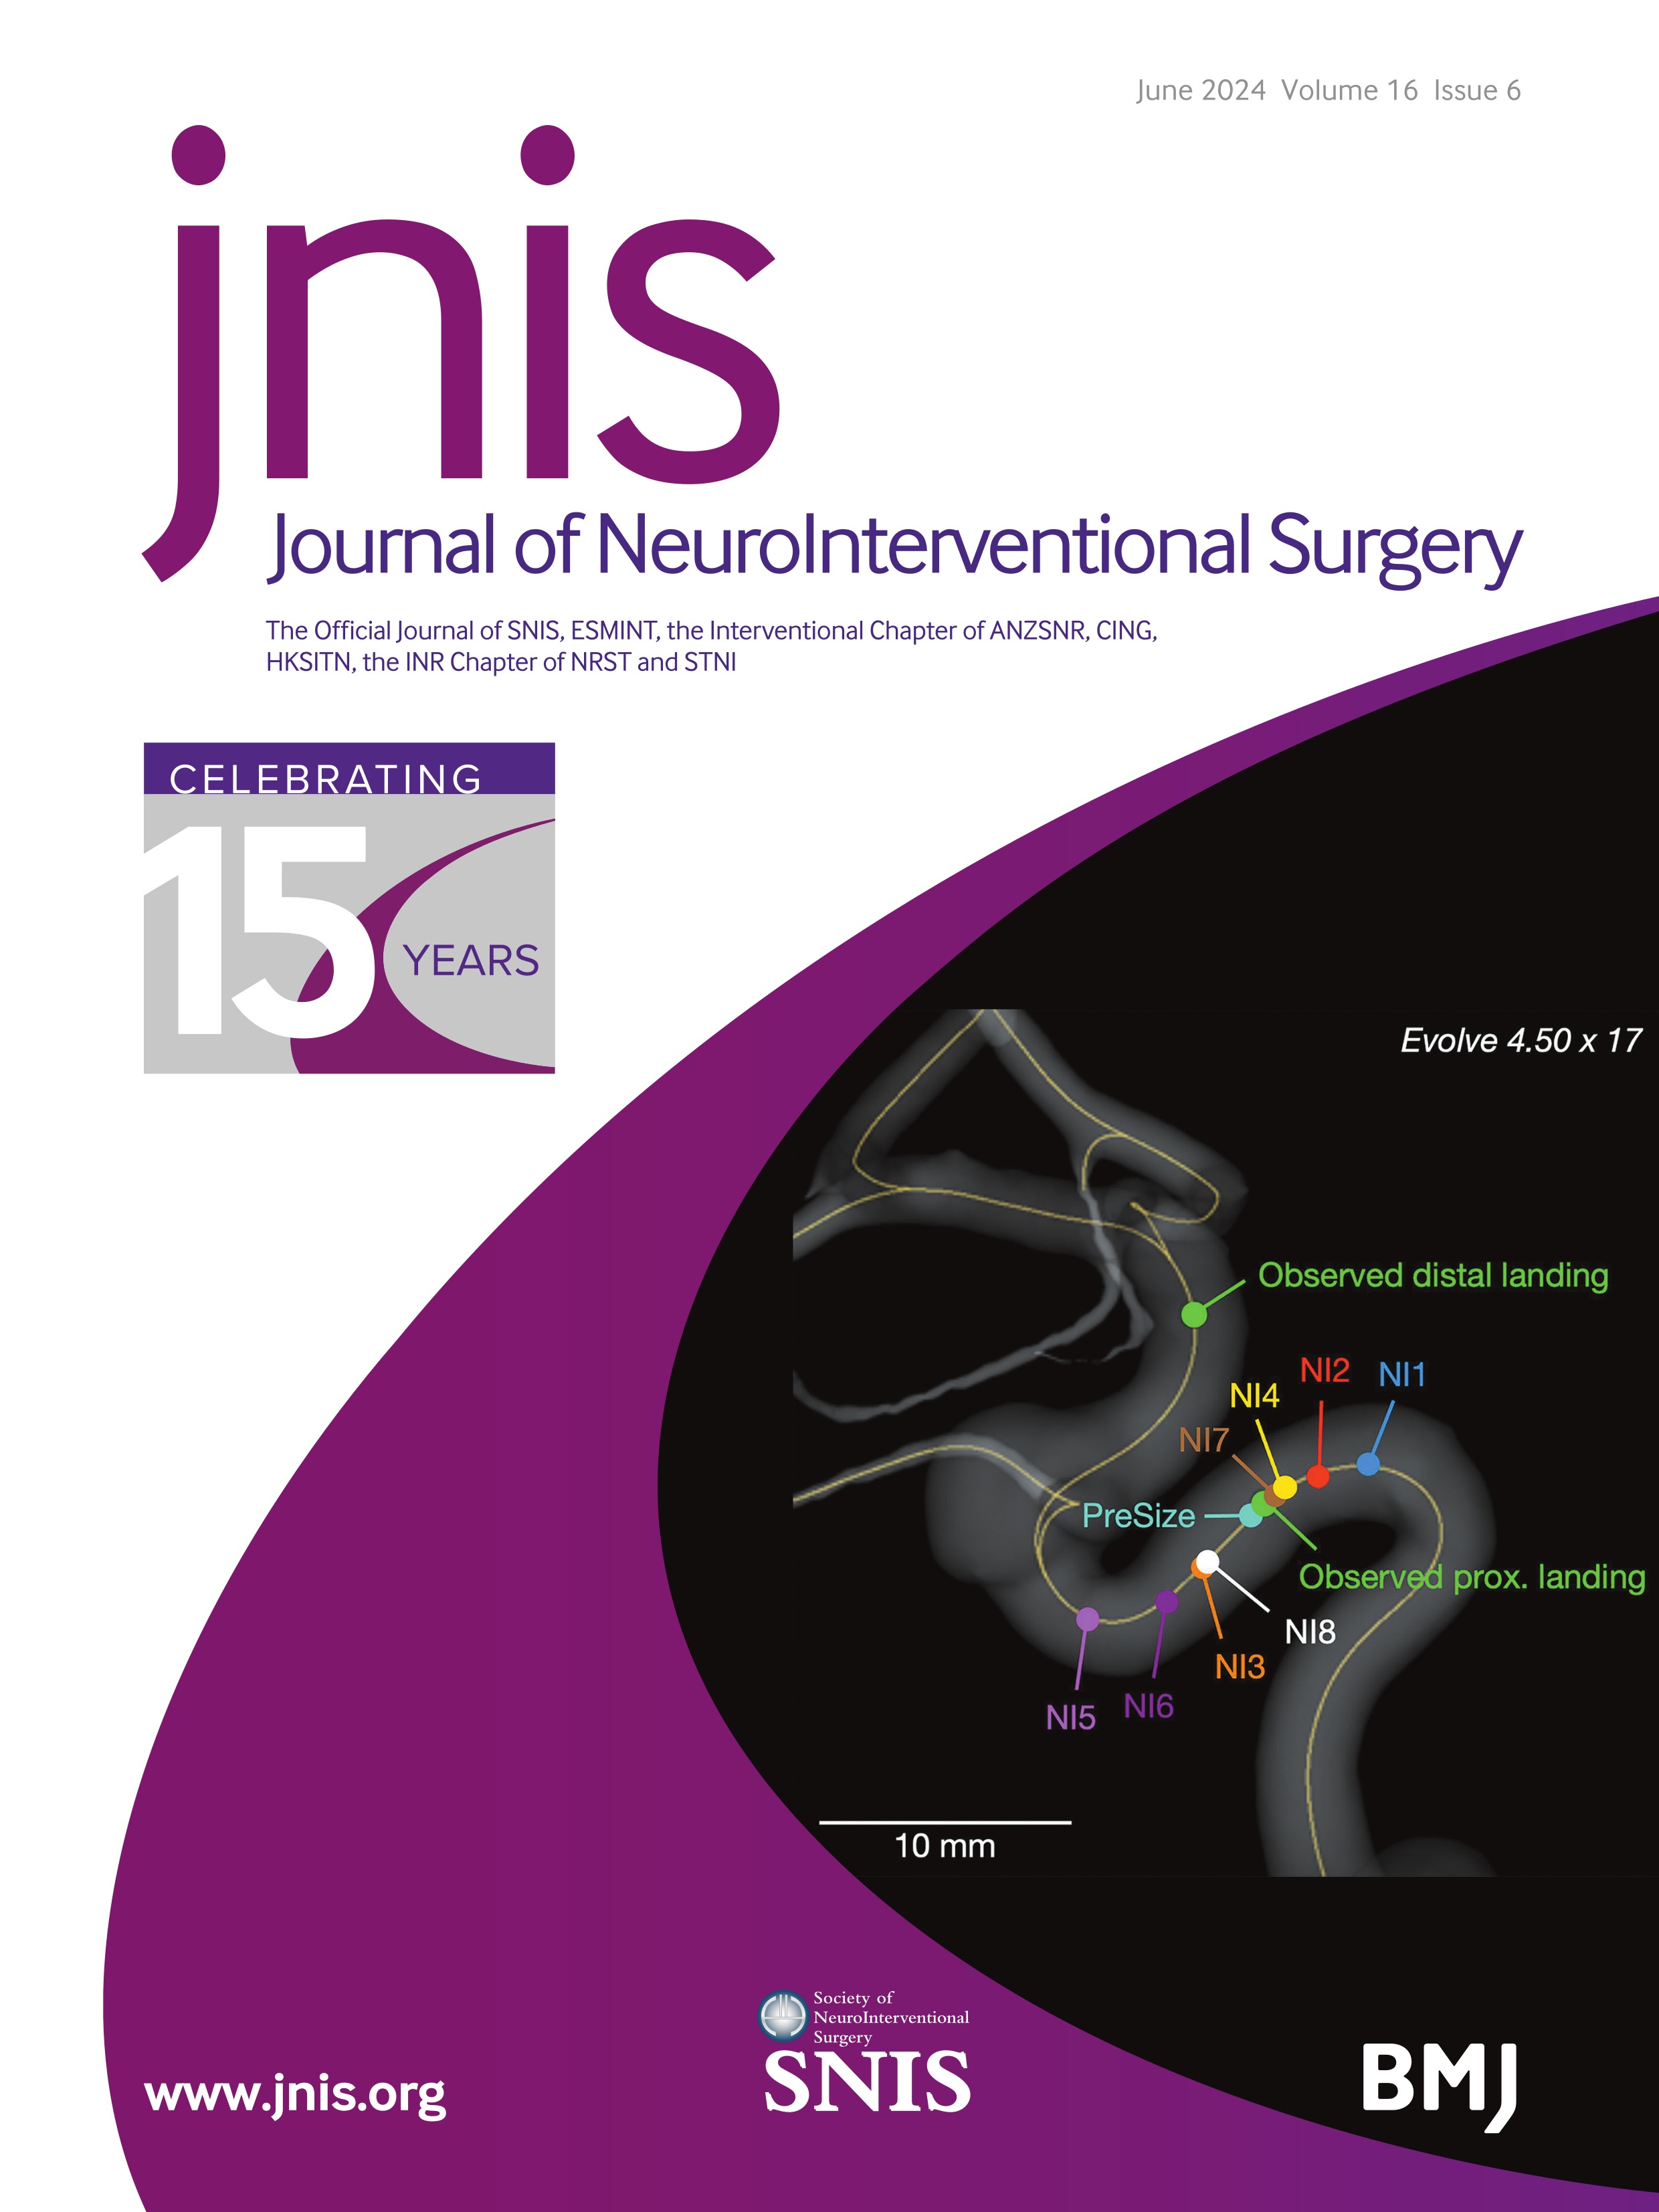 Preoperative embolization of brain arteriovenous malformation and efficacy in intraoperative blood loss reduction: a quantitative study